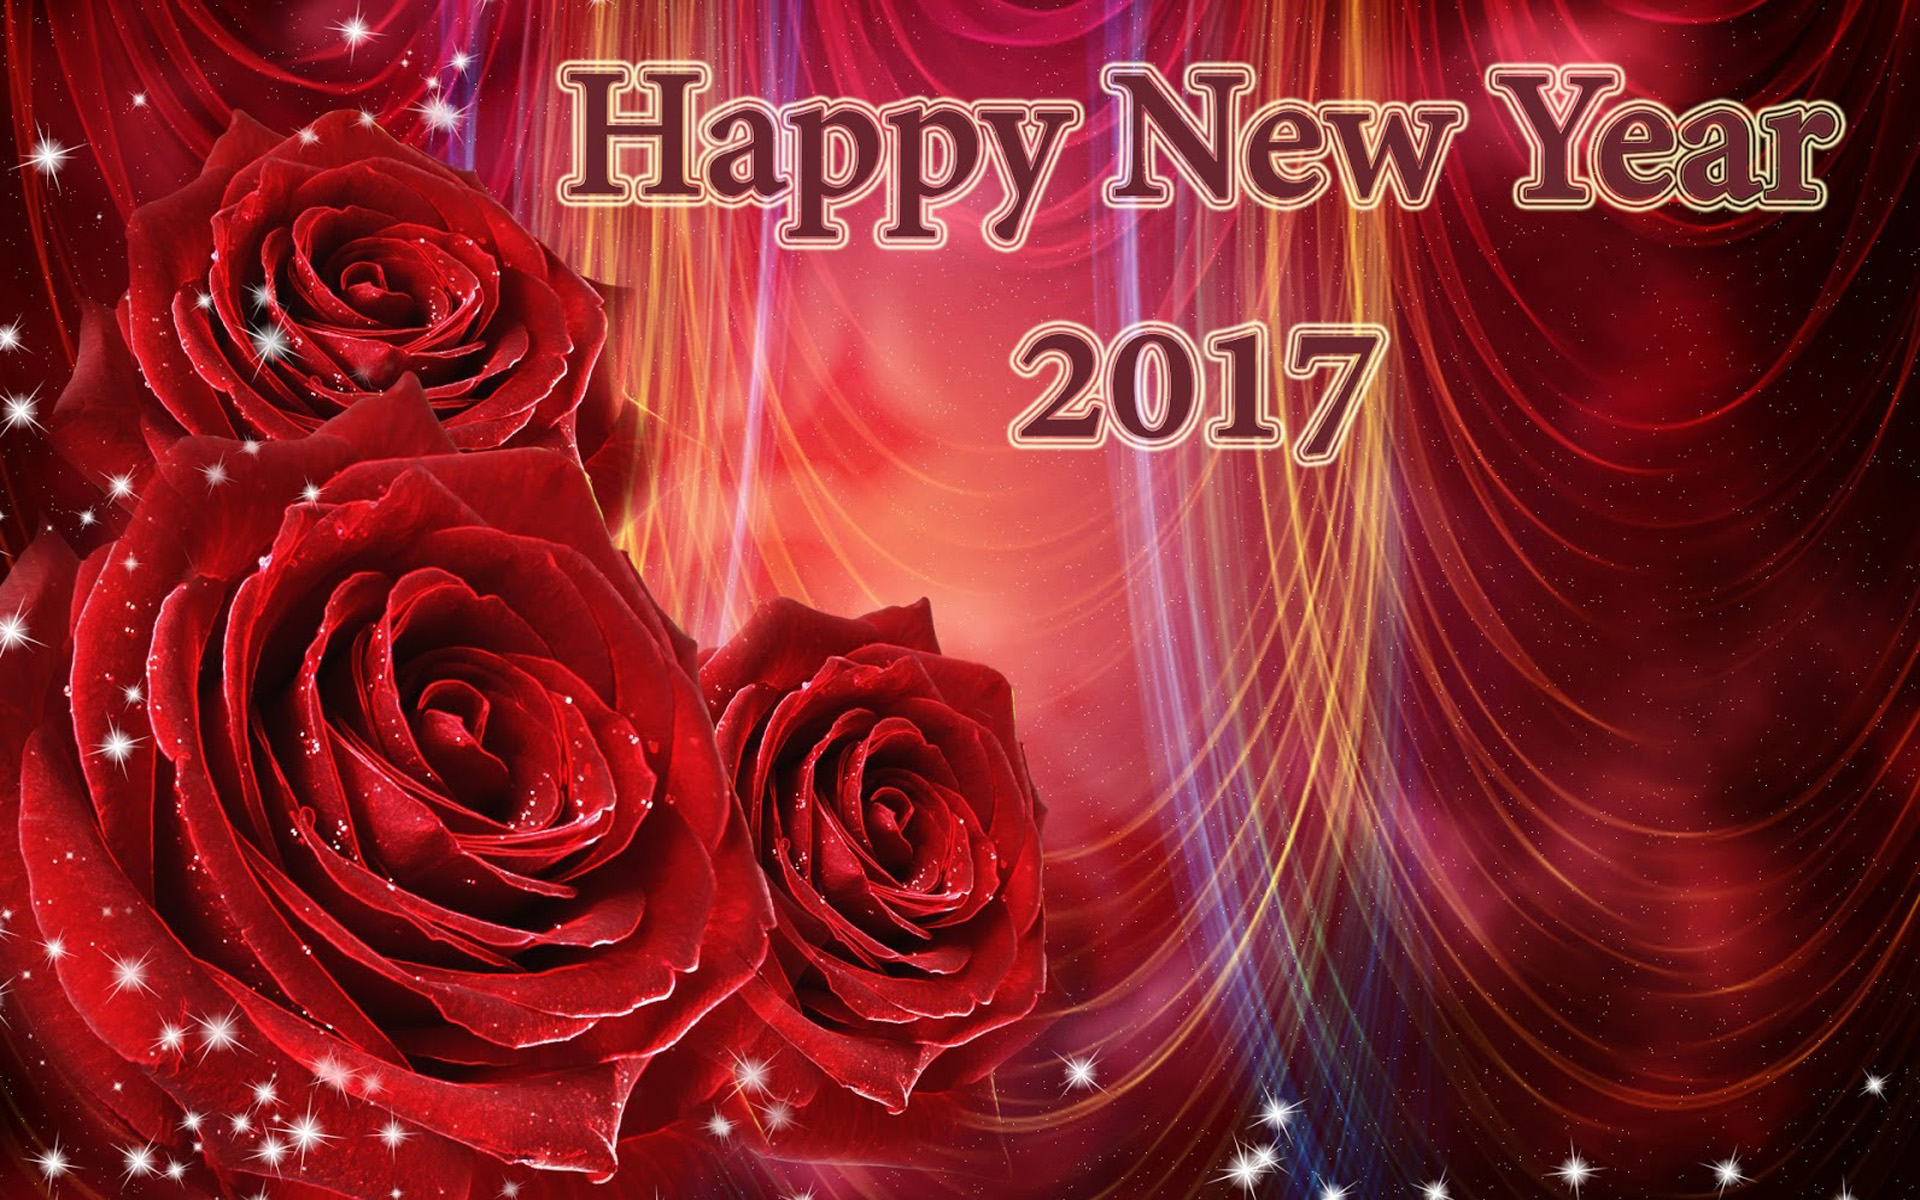 Holiday New Year New Year 2017 Red Rose Rose 1920x1200